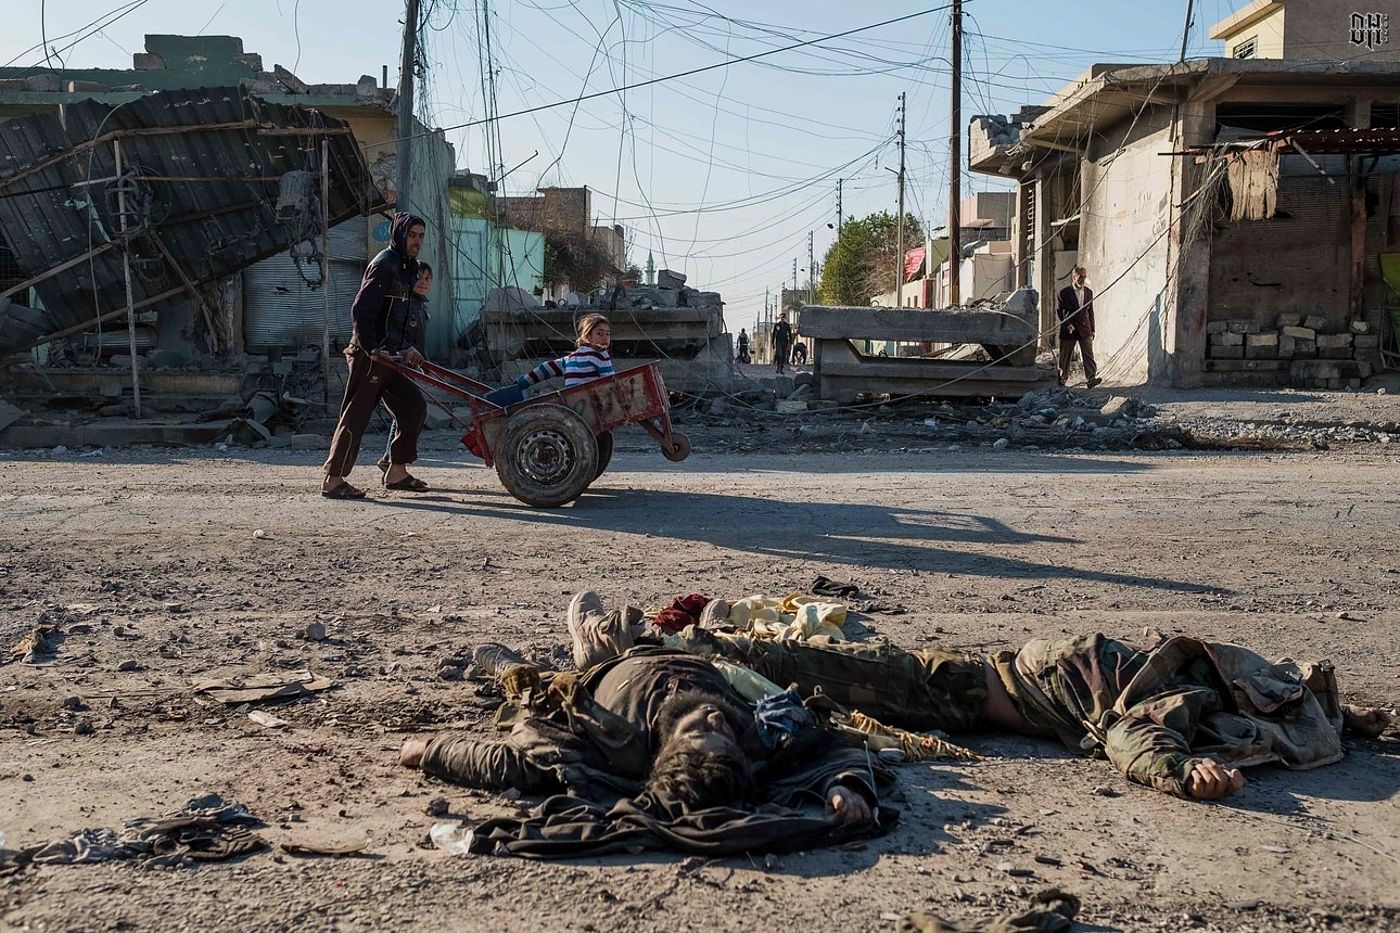 DH - Corpses of Mosul Iraq 2.jpg